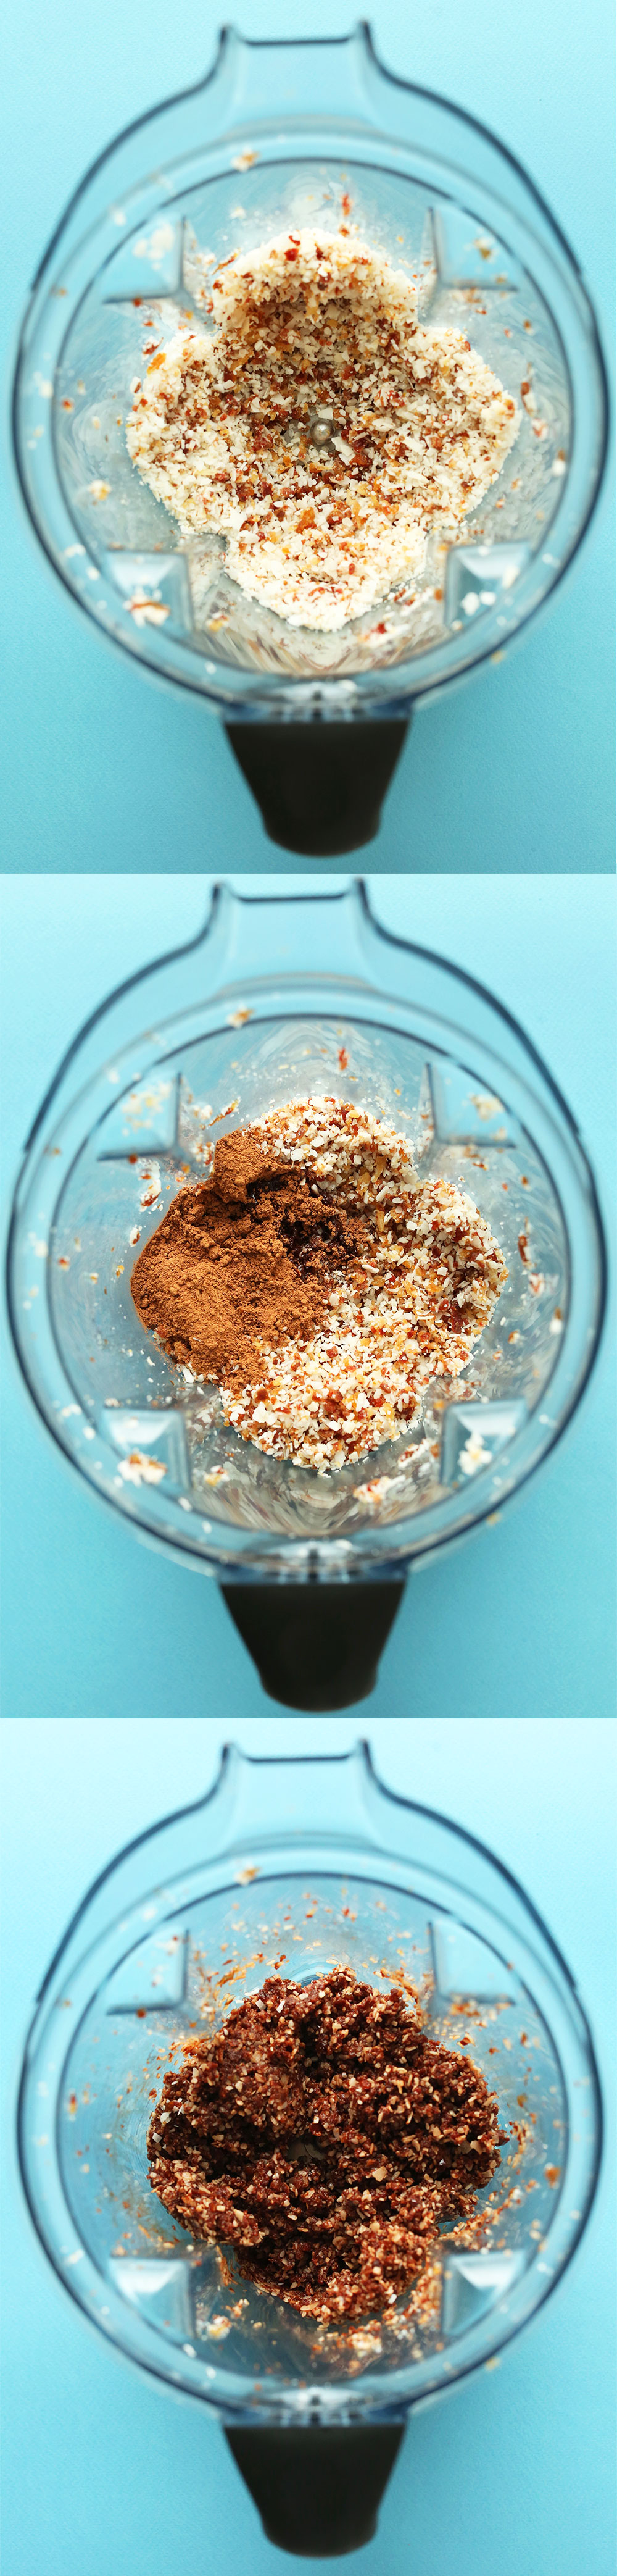 Blender filled with ingredients for making gluten-free vegan Raw Double Chocolate Macaroons